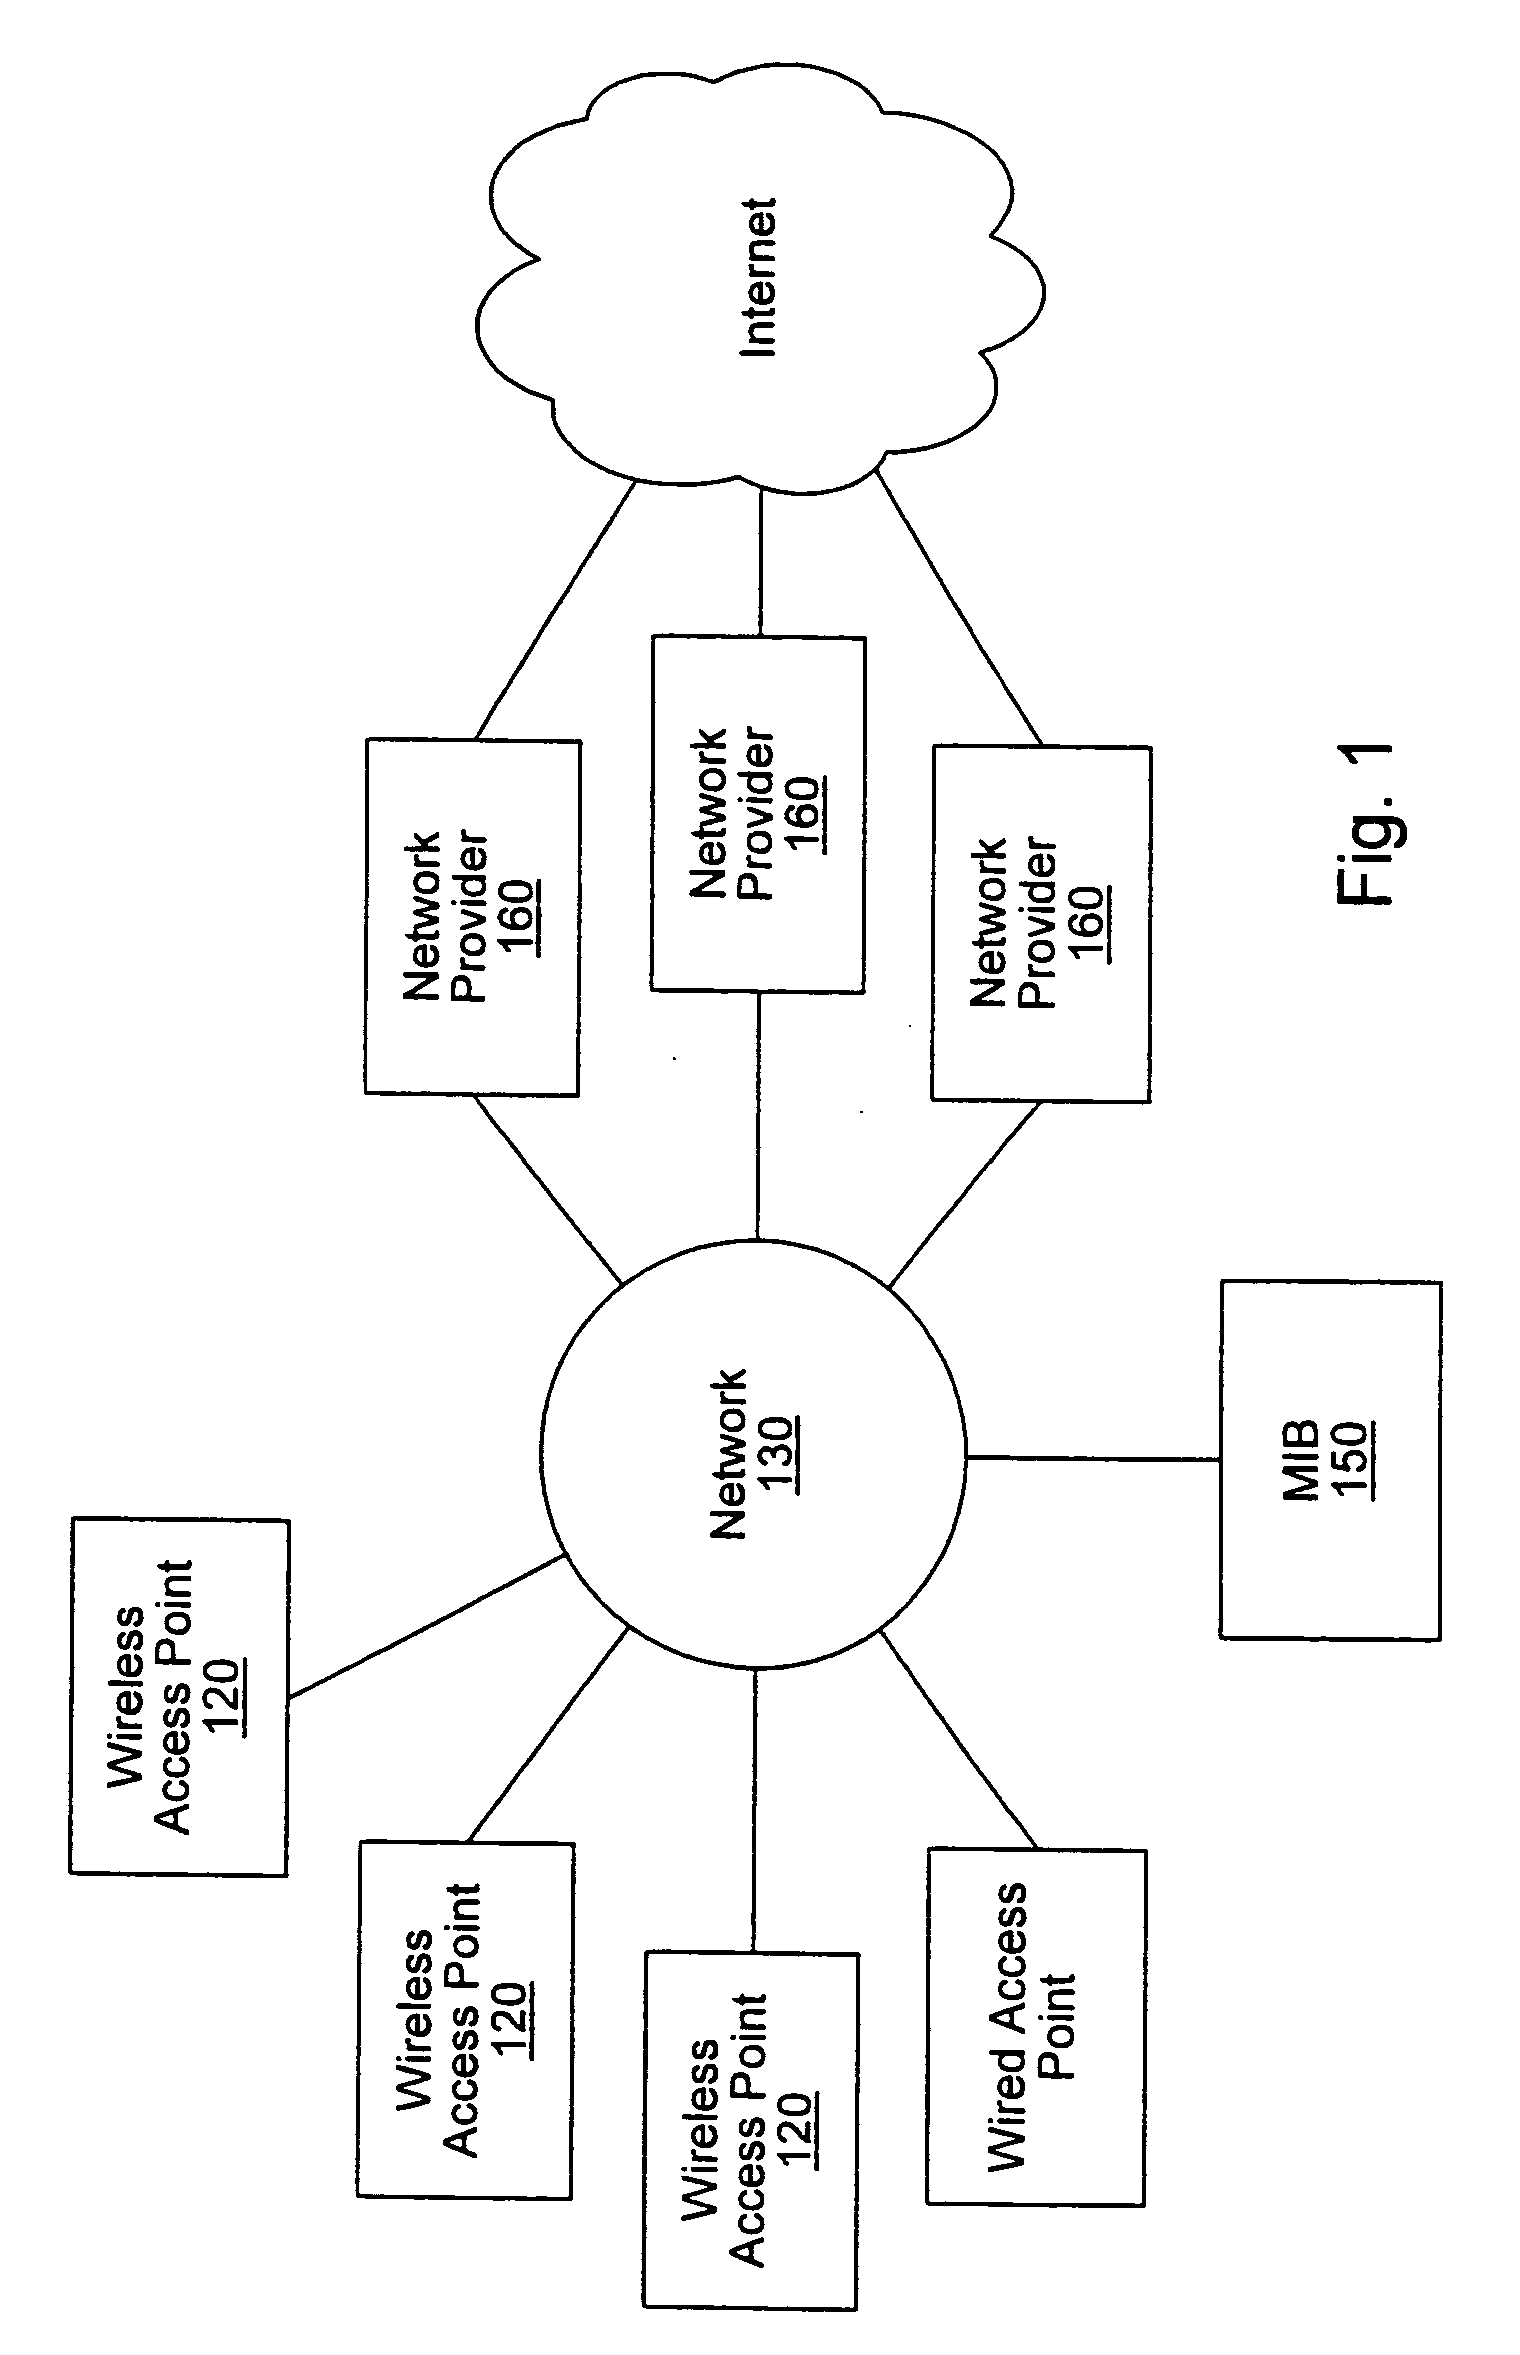 Distributed network communication system which enables multiple network providers to use a common distributed network infrastructure